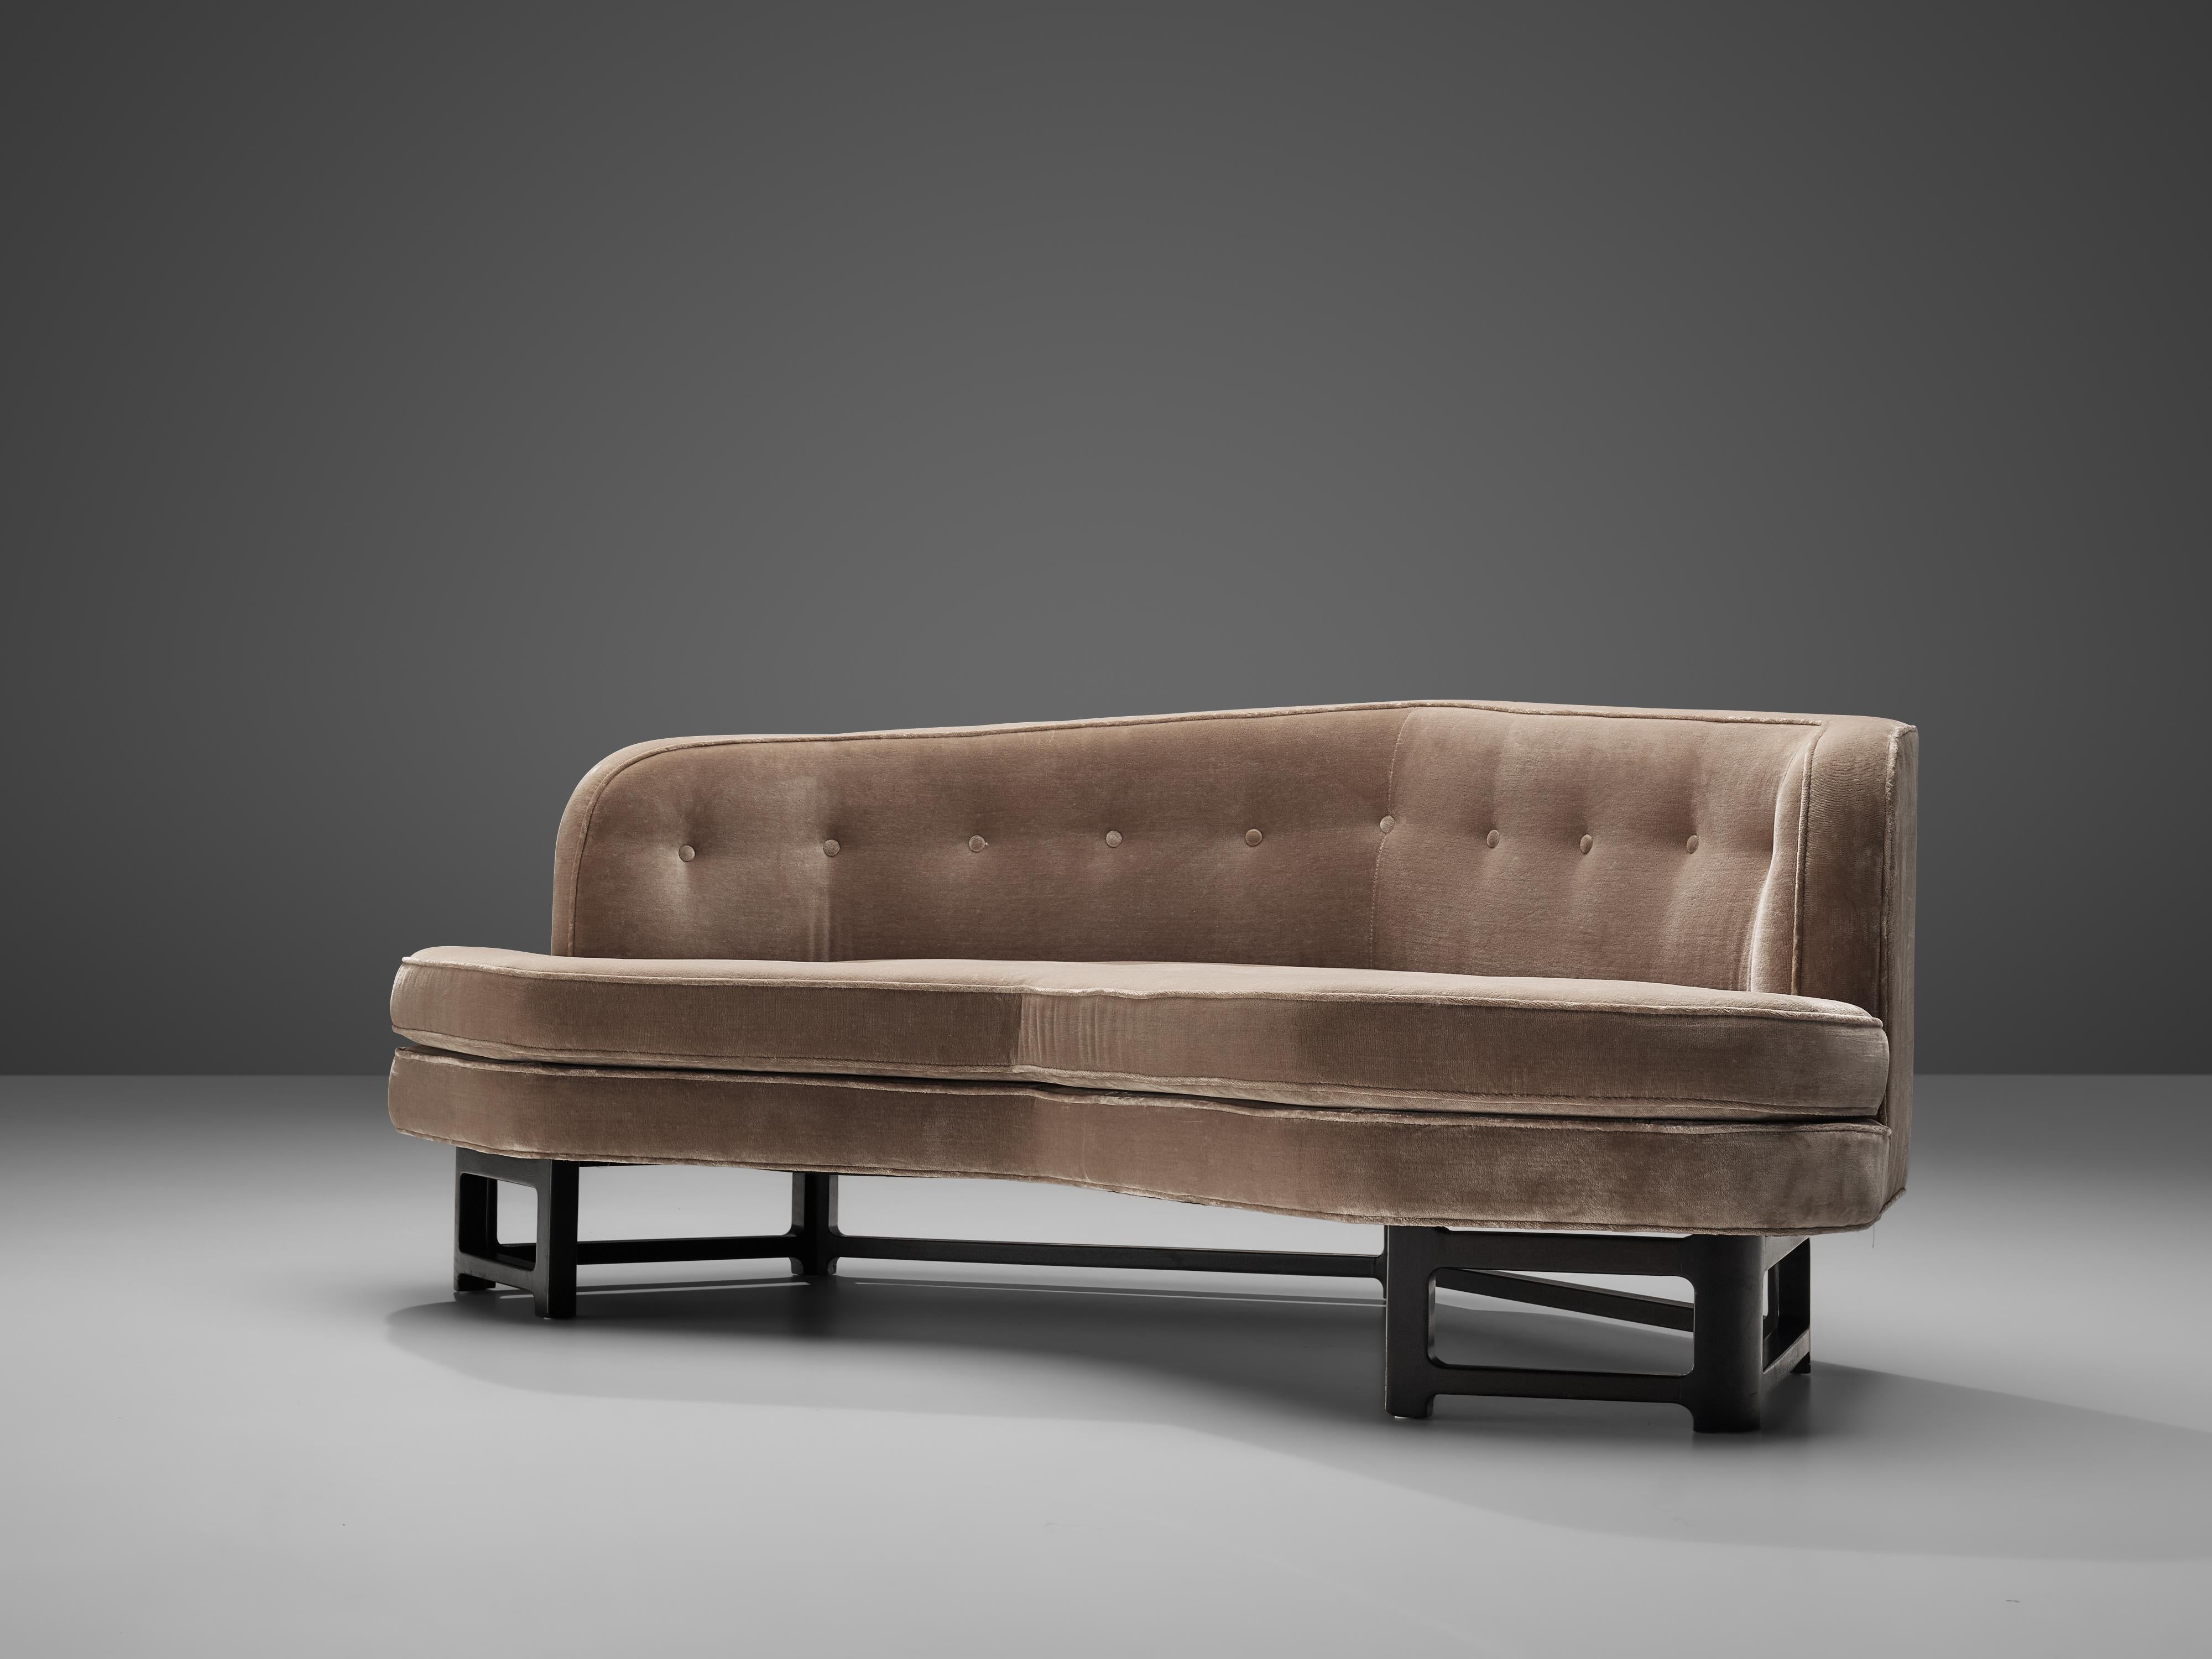 Edward Wormley for Dunbar, 'Janus' sofa, taupe velvet upholstery, mahogany, United States, 1960s

Wide angled 'Janus' sofa by Edward Wormley. This sofa has a modern shape and sinuous lines which create a comfortable and appealing look. The open